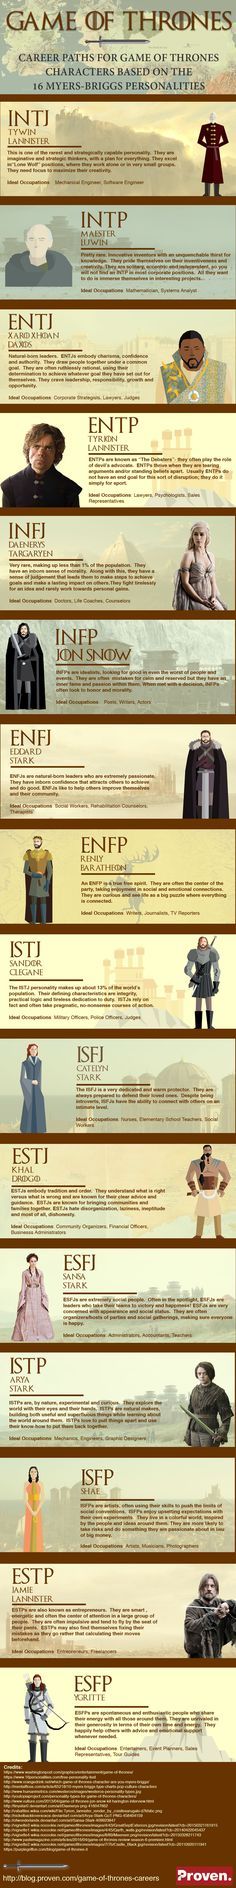 1557009270_44_Infographic-Careers-for-Game-of-Thrones-Characters-16-Career Infographic : Careers for Game of Thrones Characters: 16 Career Paths Based on Myers Briggs Personality Types #Infographic